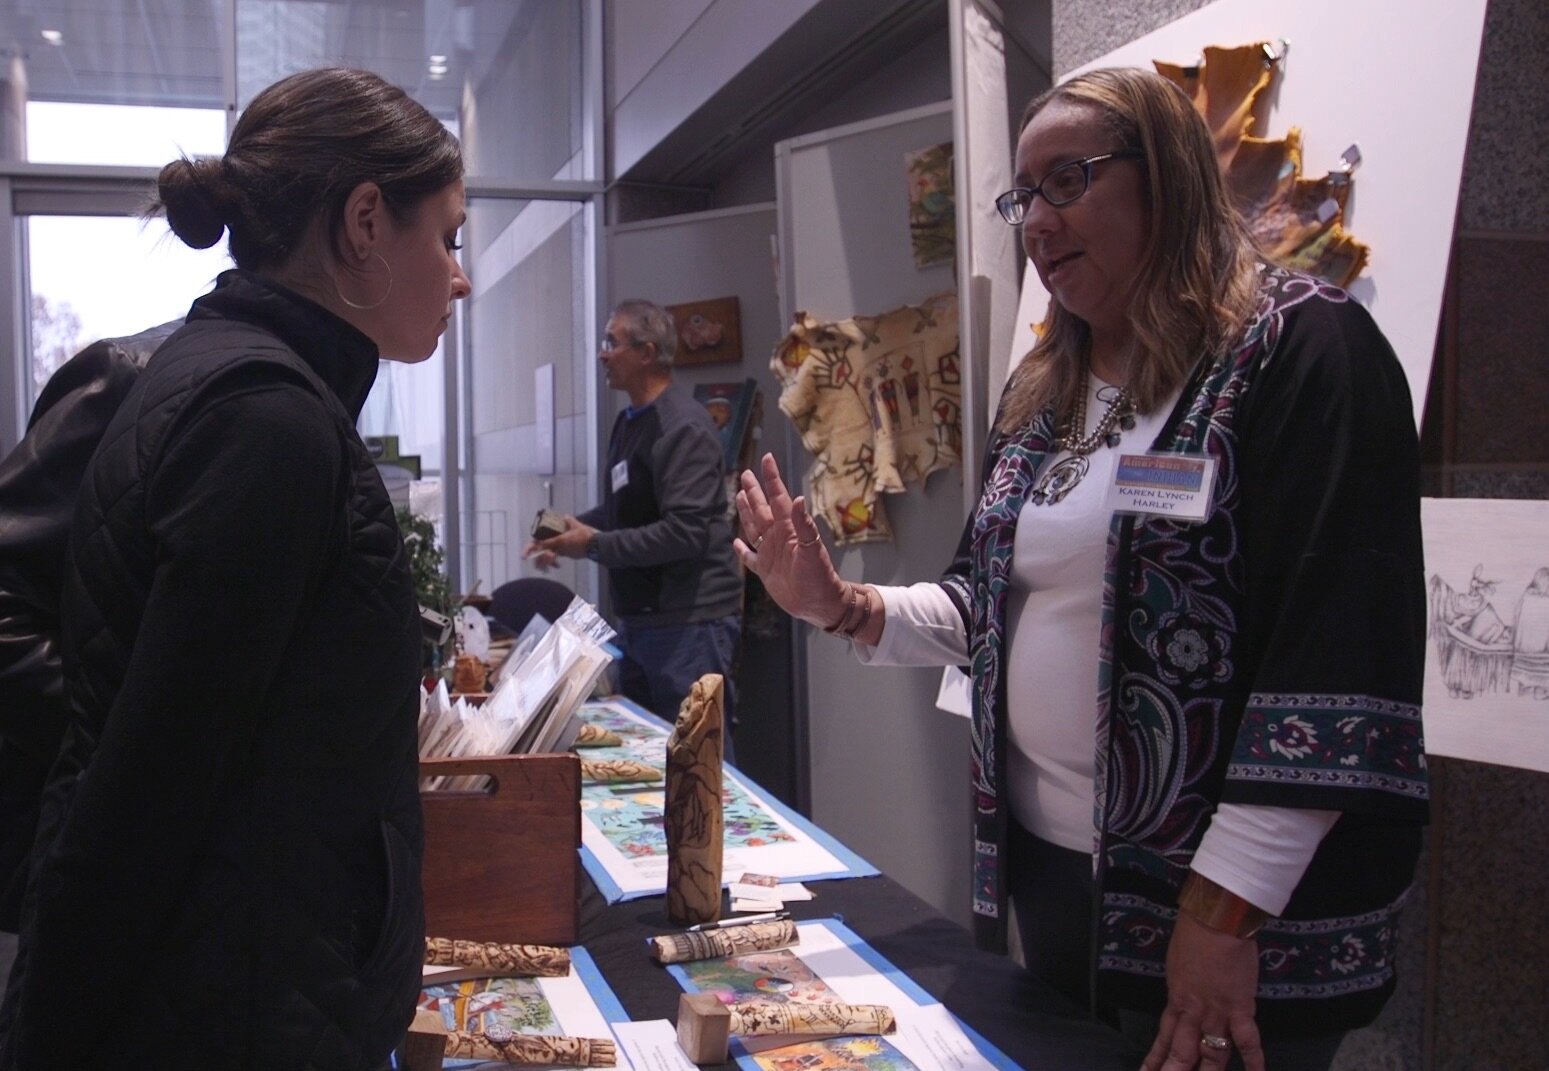  Here artist Karen Harley shares information about the renderings with an attendee of the 24th Annual American Indian Heritage Celebration.  Photo Courtesy of Brooks Bennett  